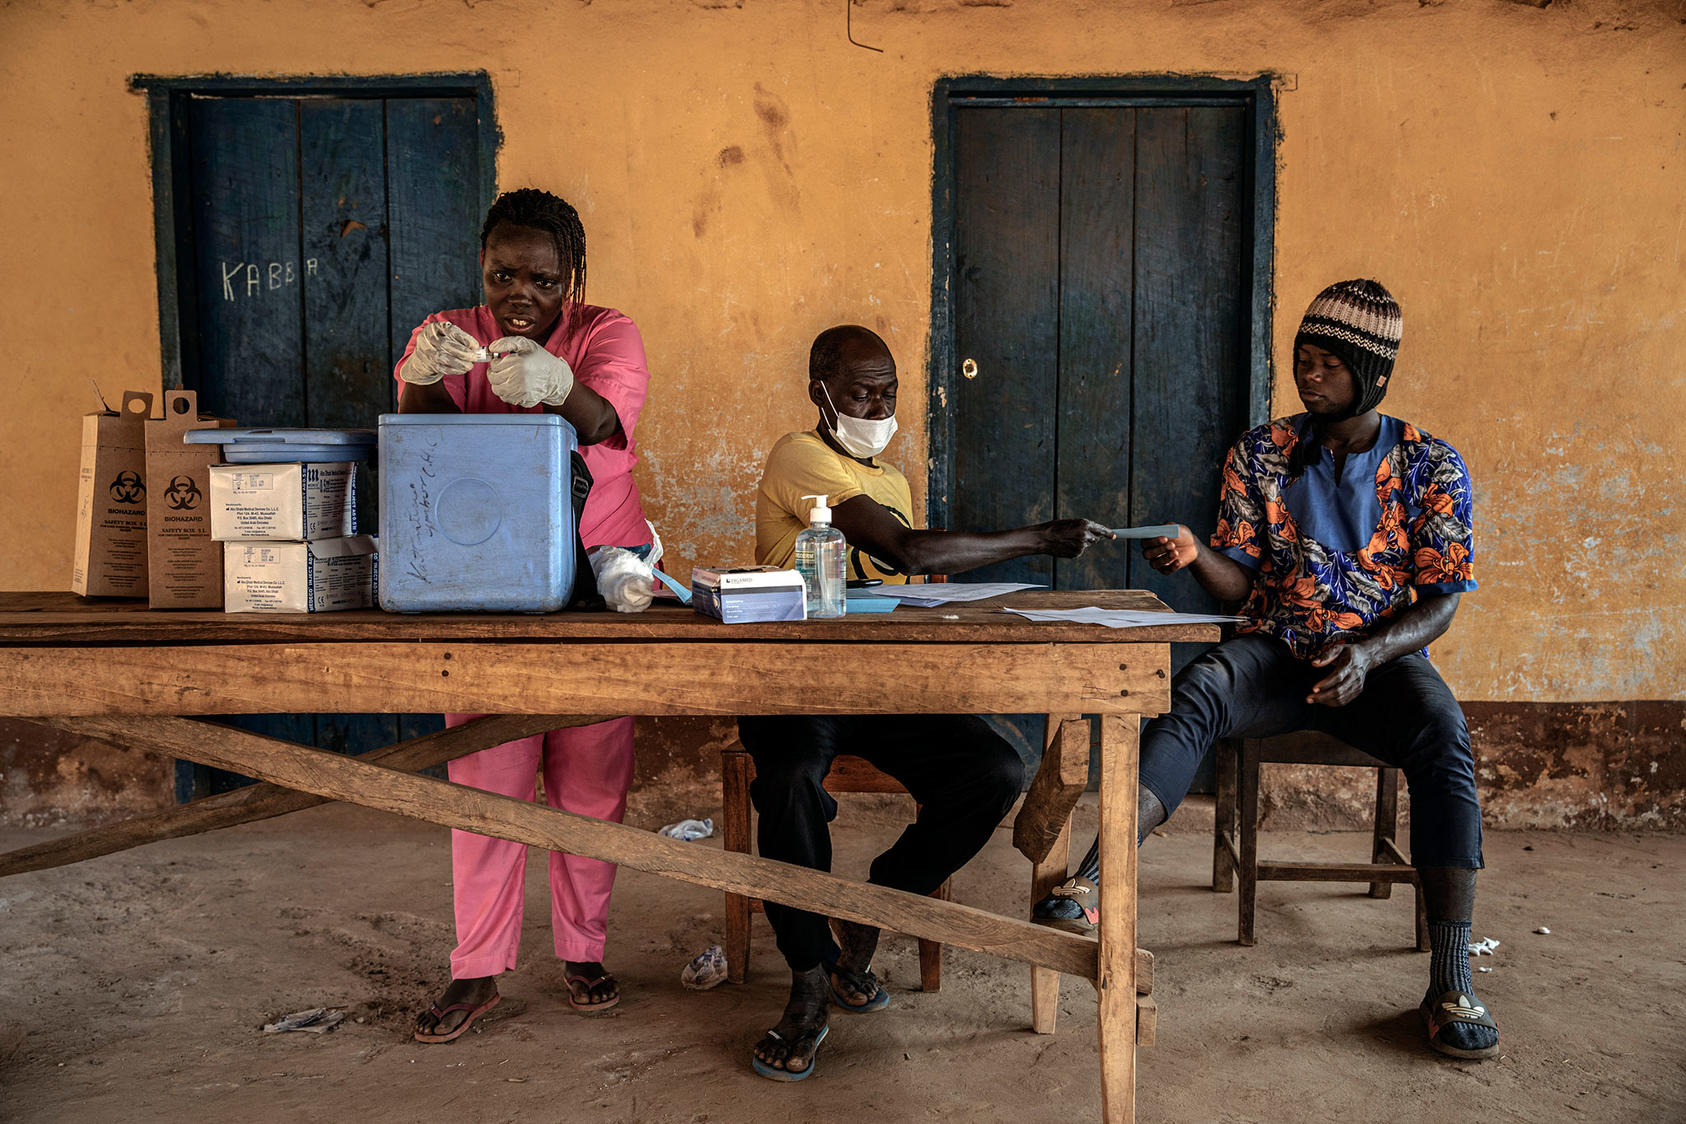 Health workers in Sierra Leone give COVID vaccinations in the village of Kathantha Yimbo, handing blue record cards to vaccinated residents. Mistrust of vaccines is one obstacle to protecting people in fragile states. (Finbarr O'Reilly/The New York Times)